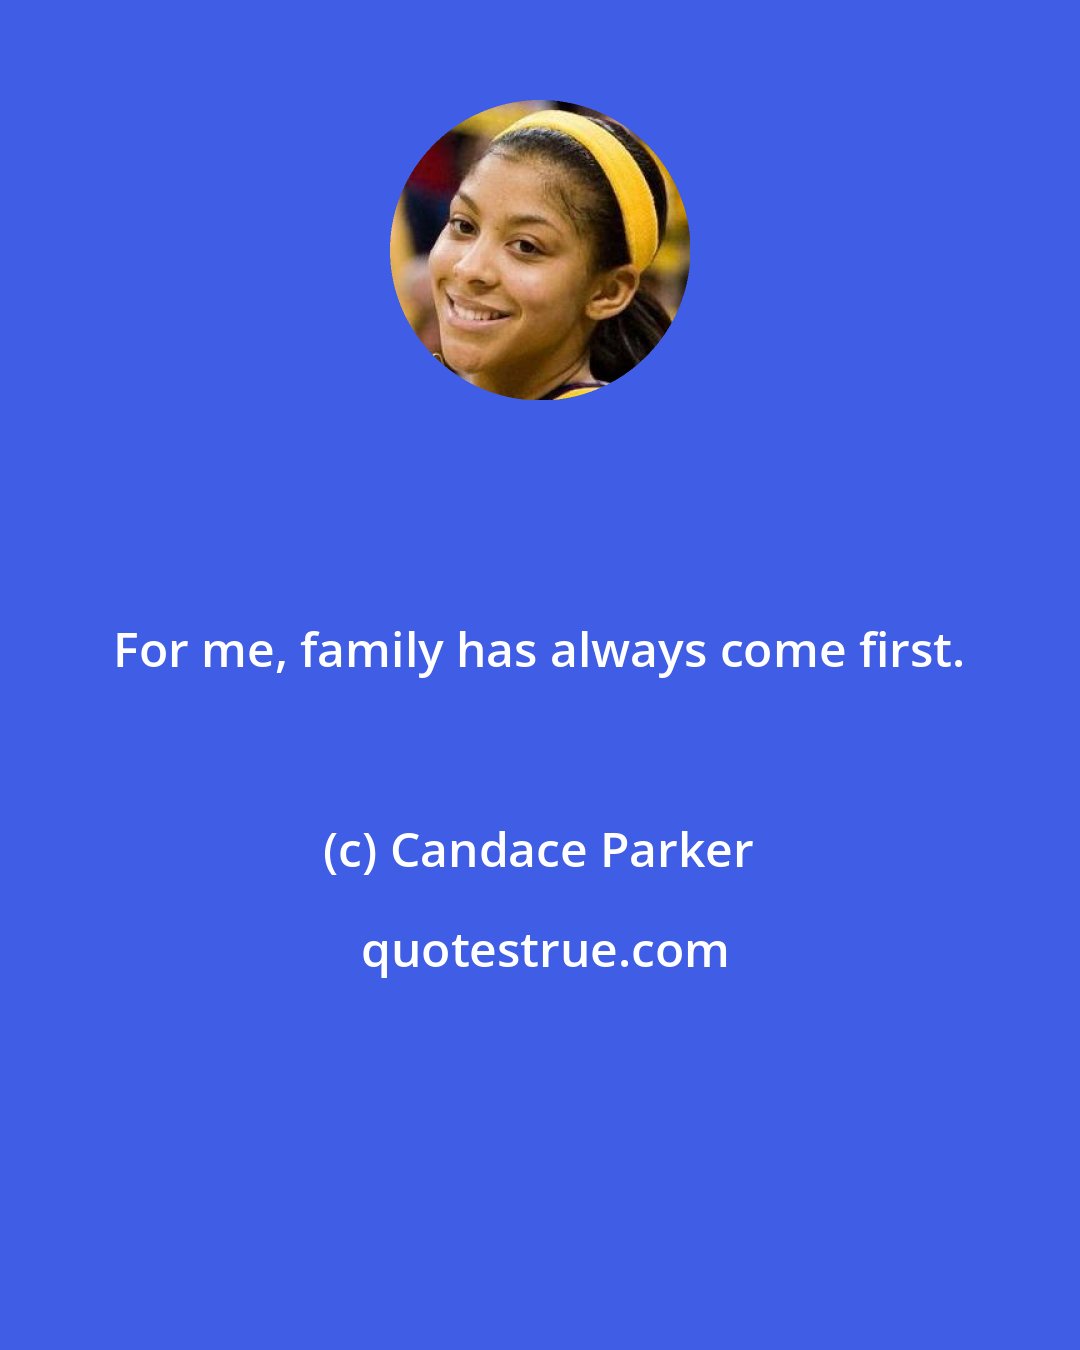 Candace Parker: For me, family has always come first.